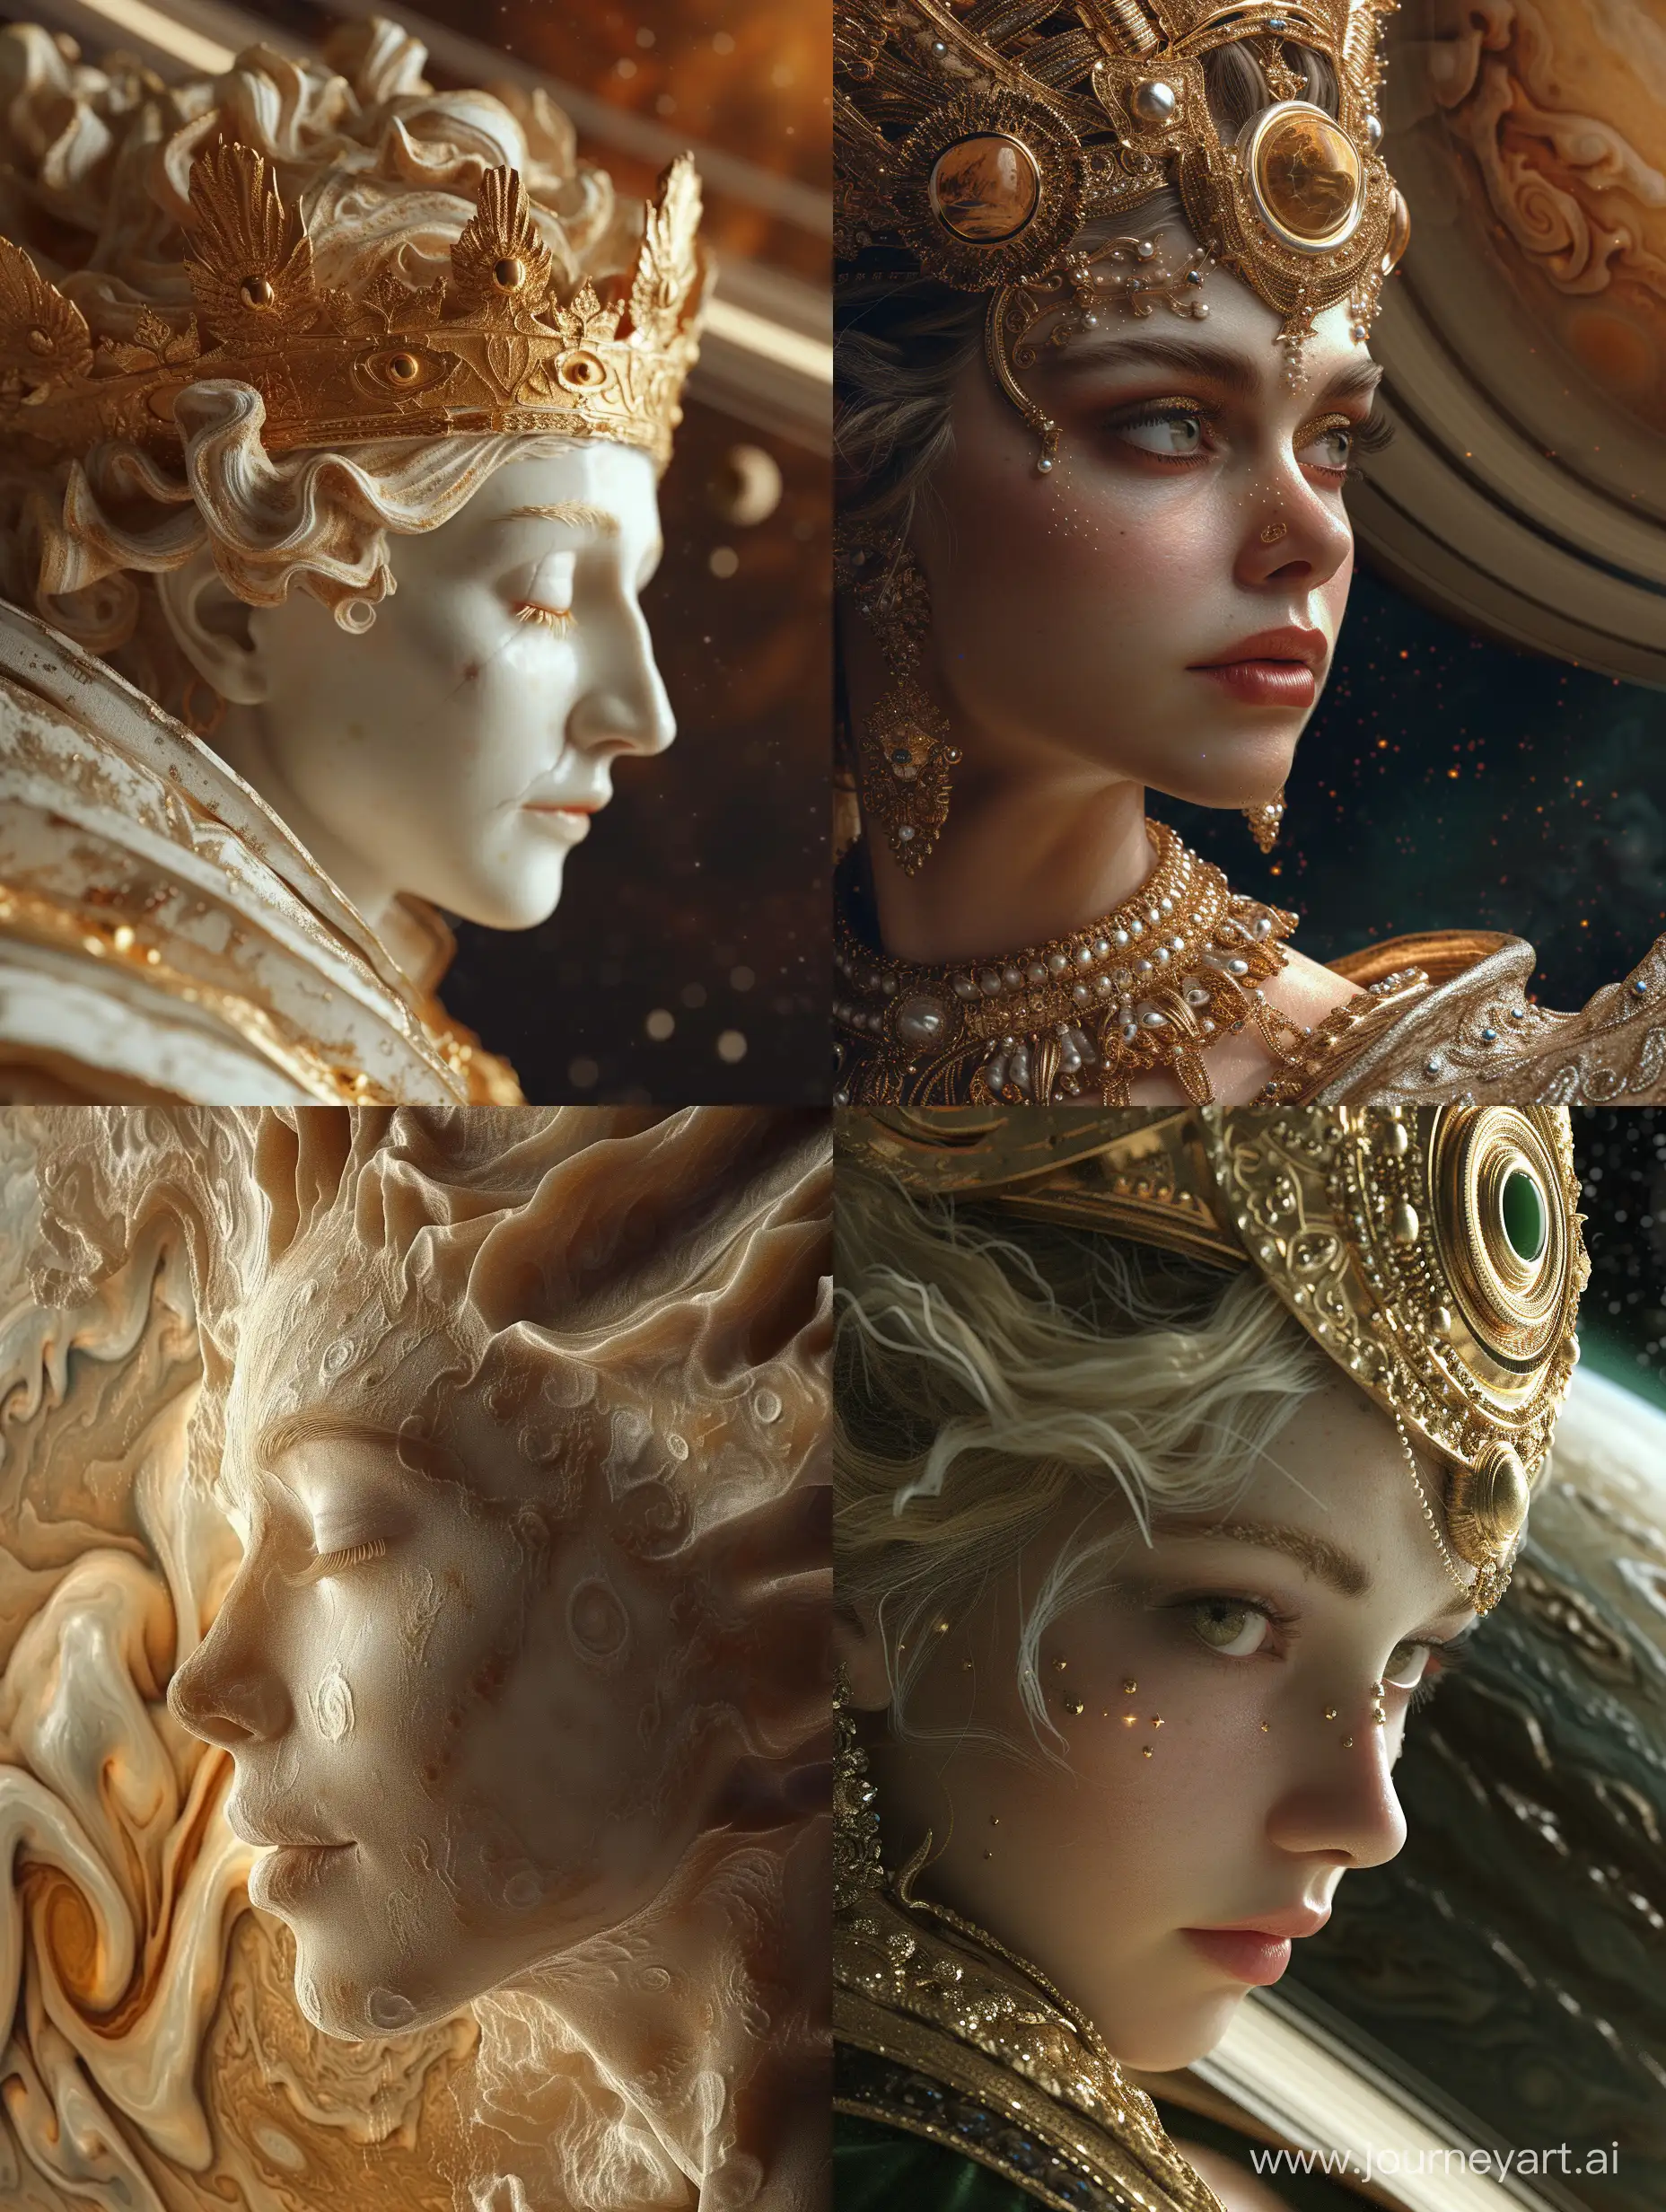 Fantasy-Portrait-of-the-Queen-of-Planet-Jupiter-Highly-Detailed-Photorealistic-Art